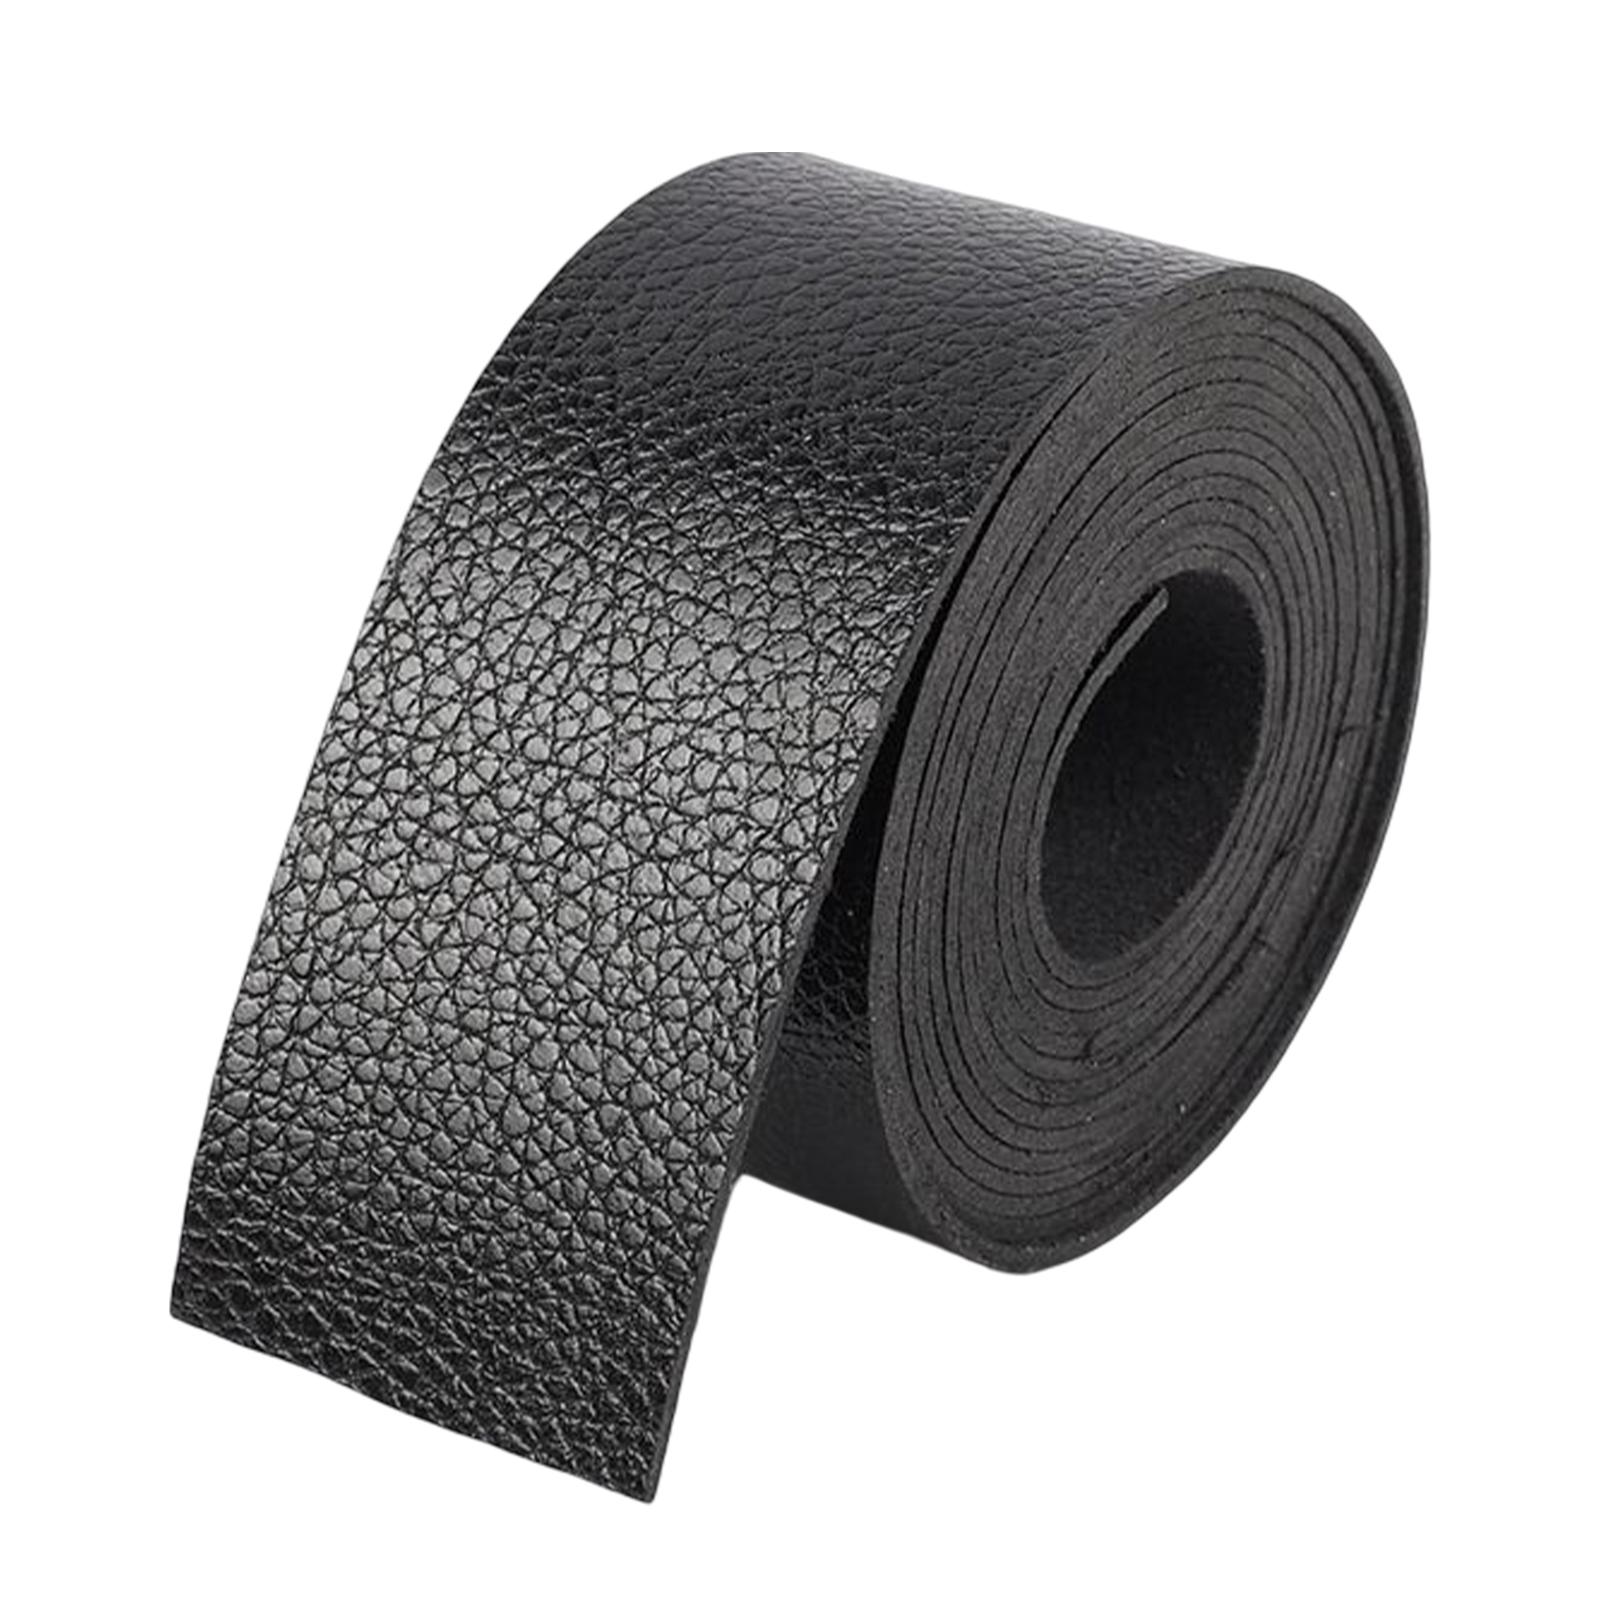 PU Leather Strap Strips Decorative Supplies for Workshop Purse Tooling Black